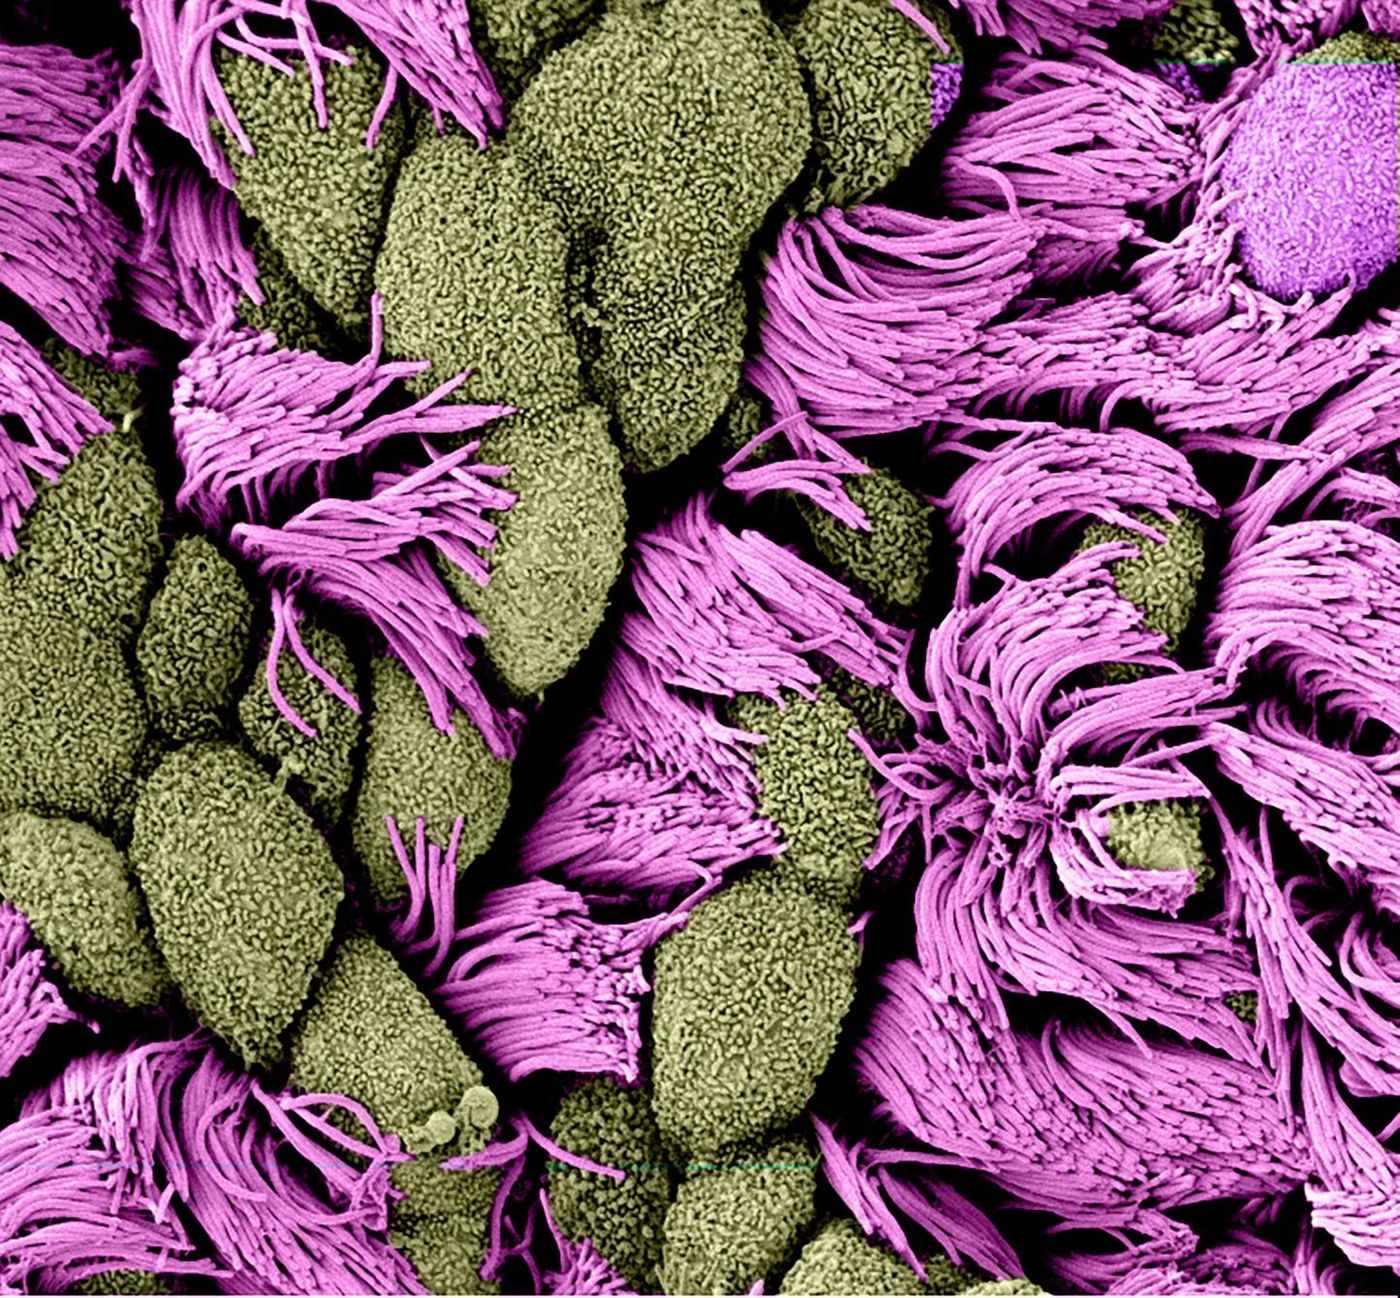 This is the surface of a multicillated cell. / Credit: Andrew Holland